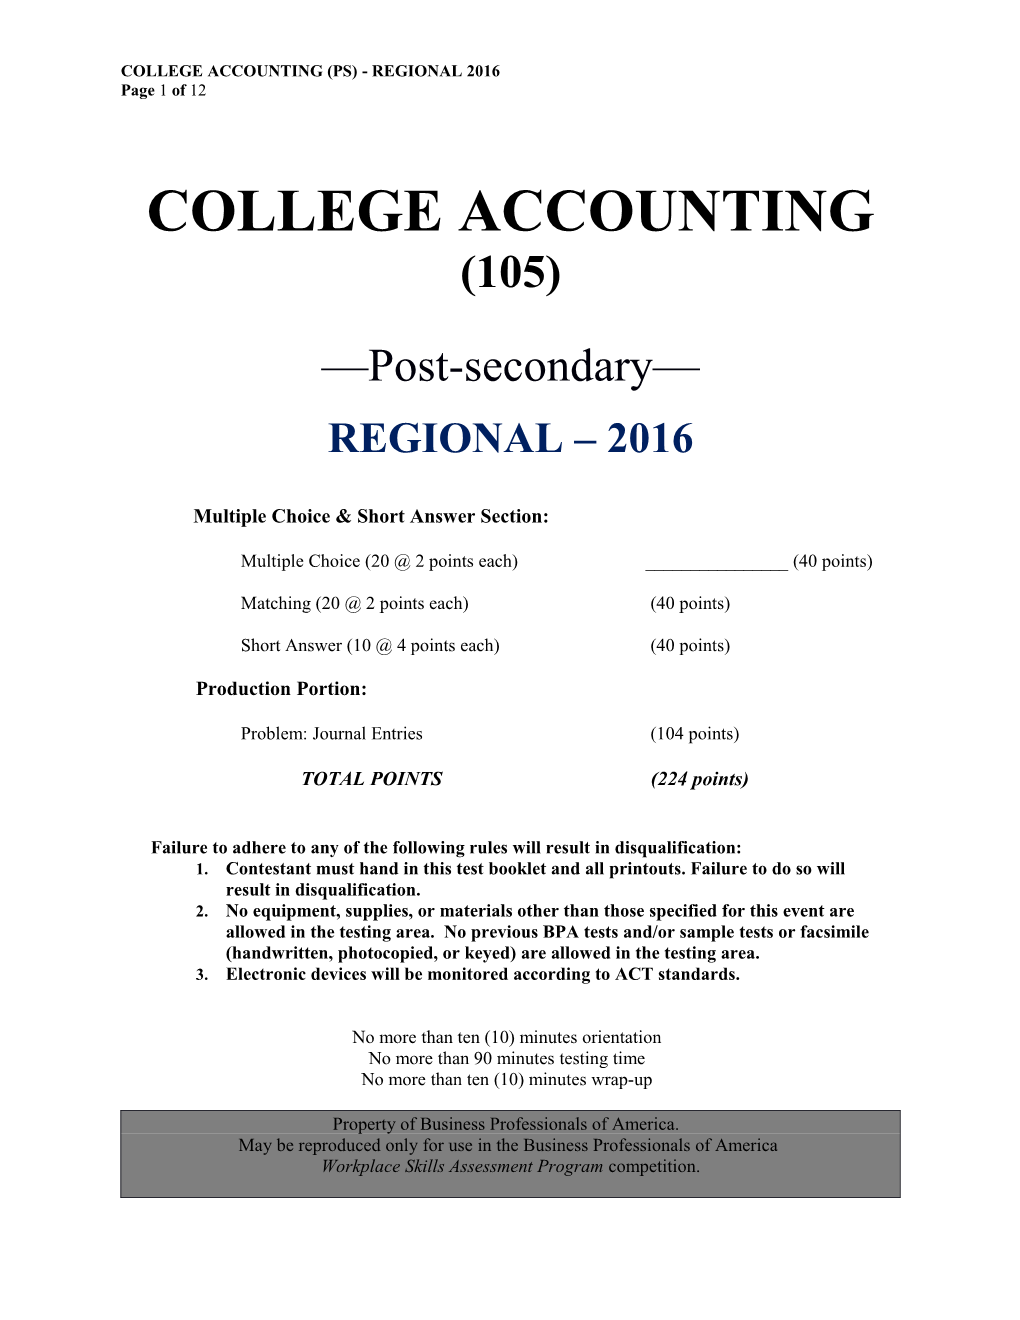 College Accounting (Ps) - Regional 2016